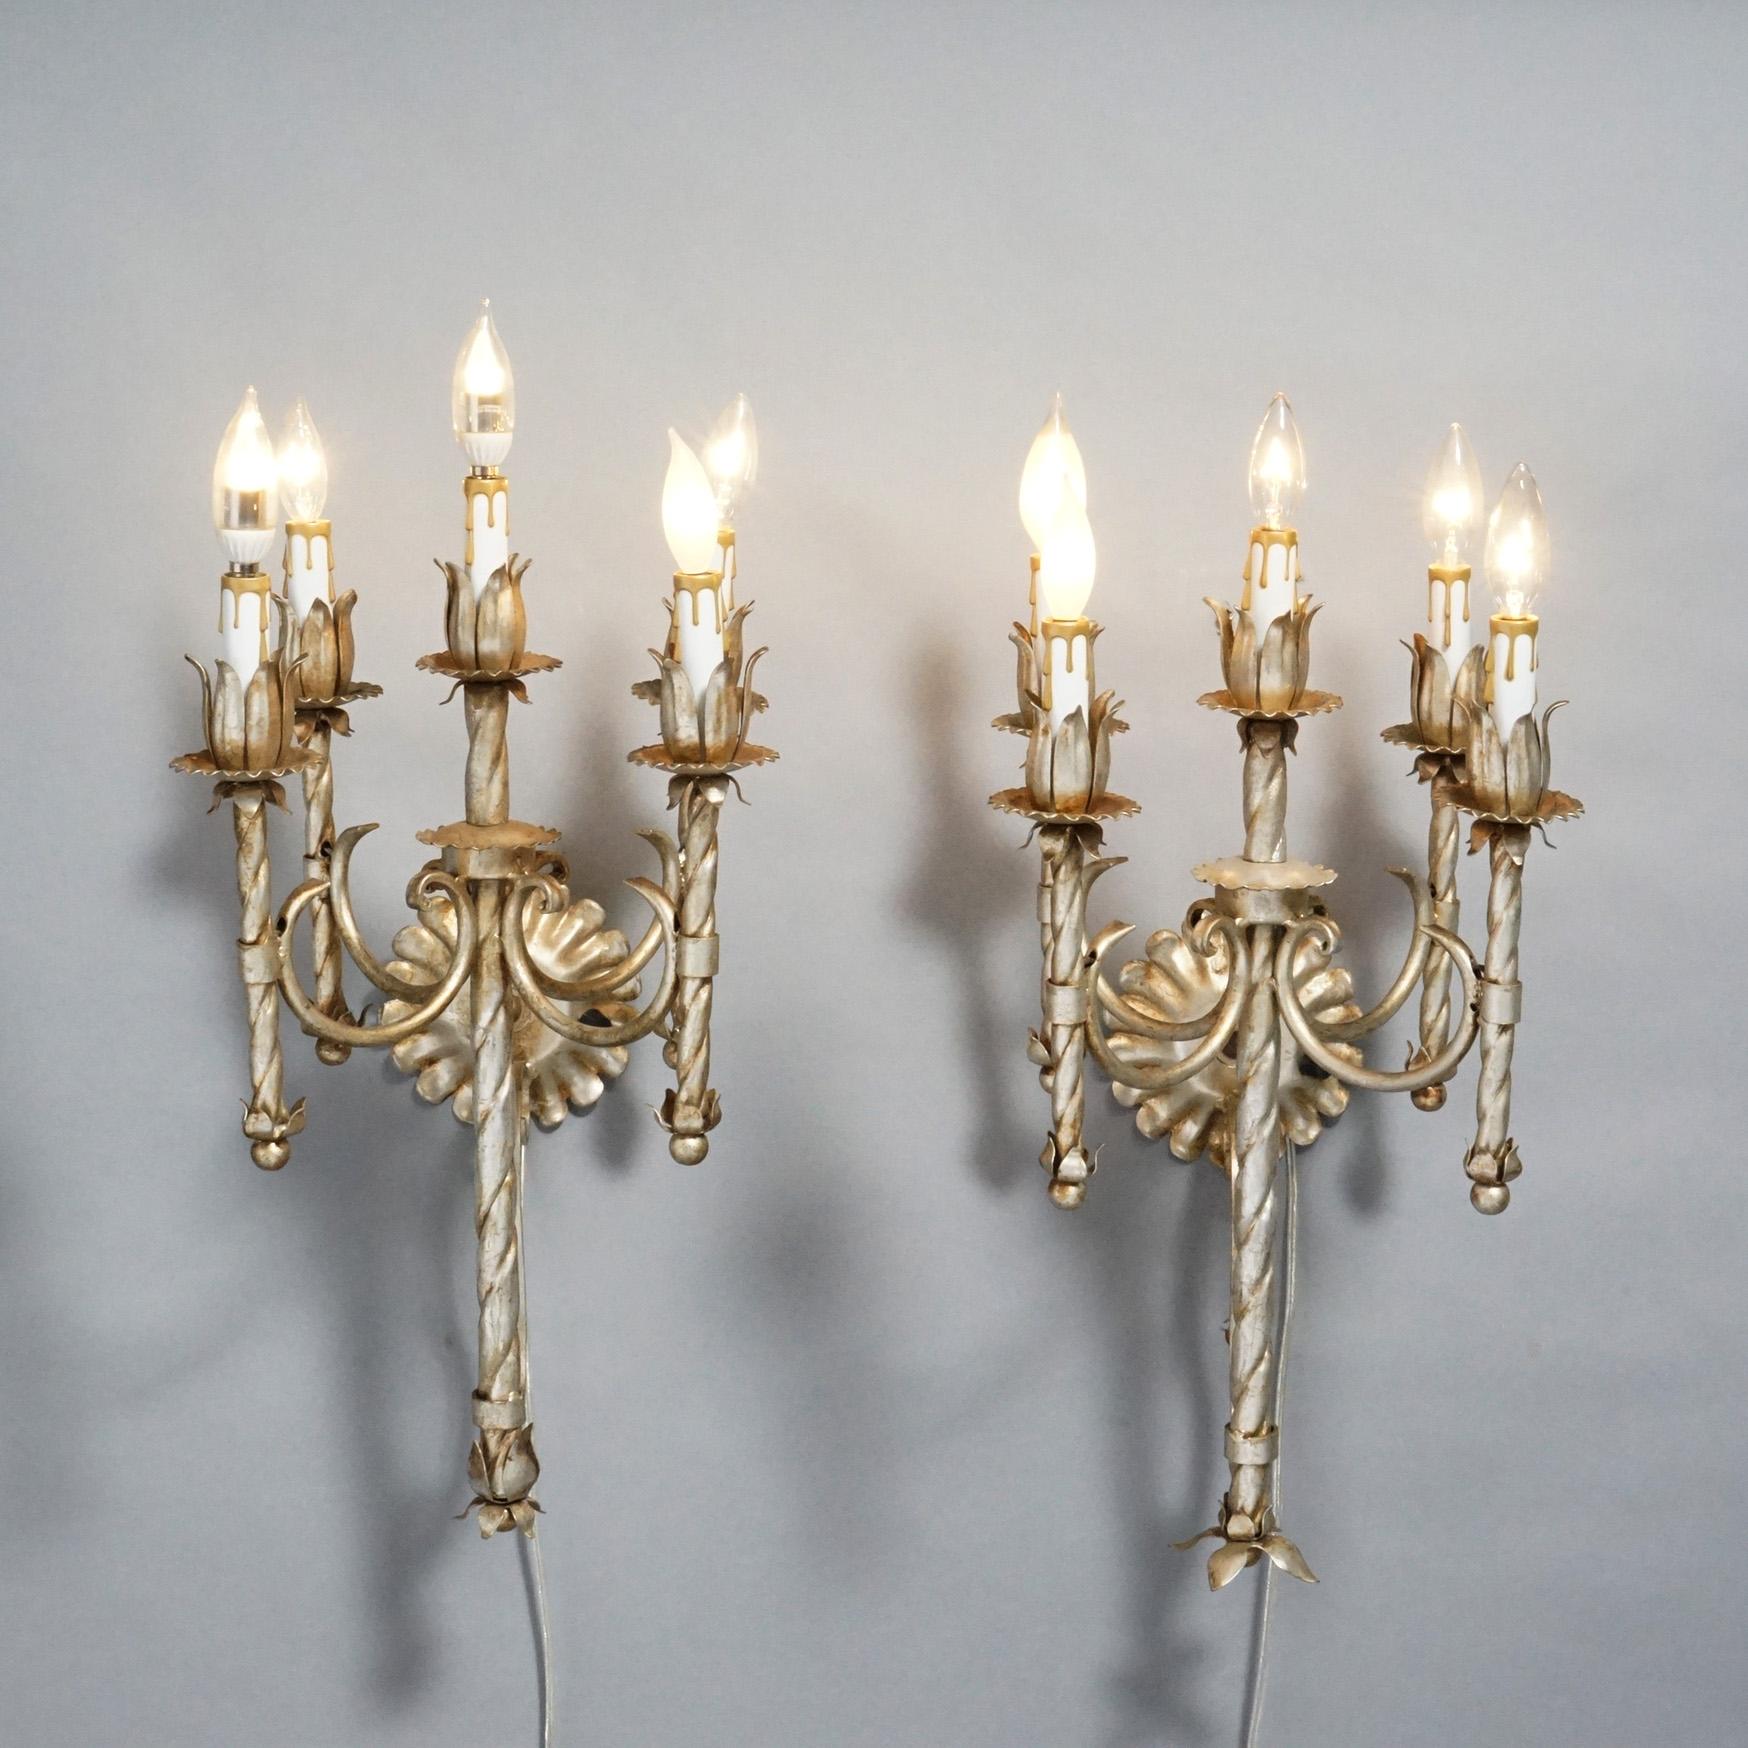 Arts and Crafts Antique Arts & Crafts Gothic Silvered Finish Candelabra Wall Sconces 20th C. For Sale